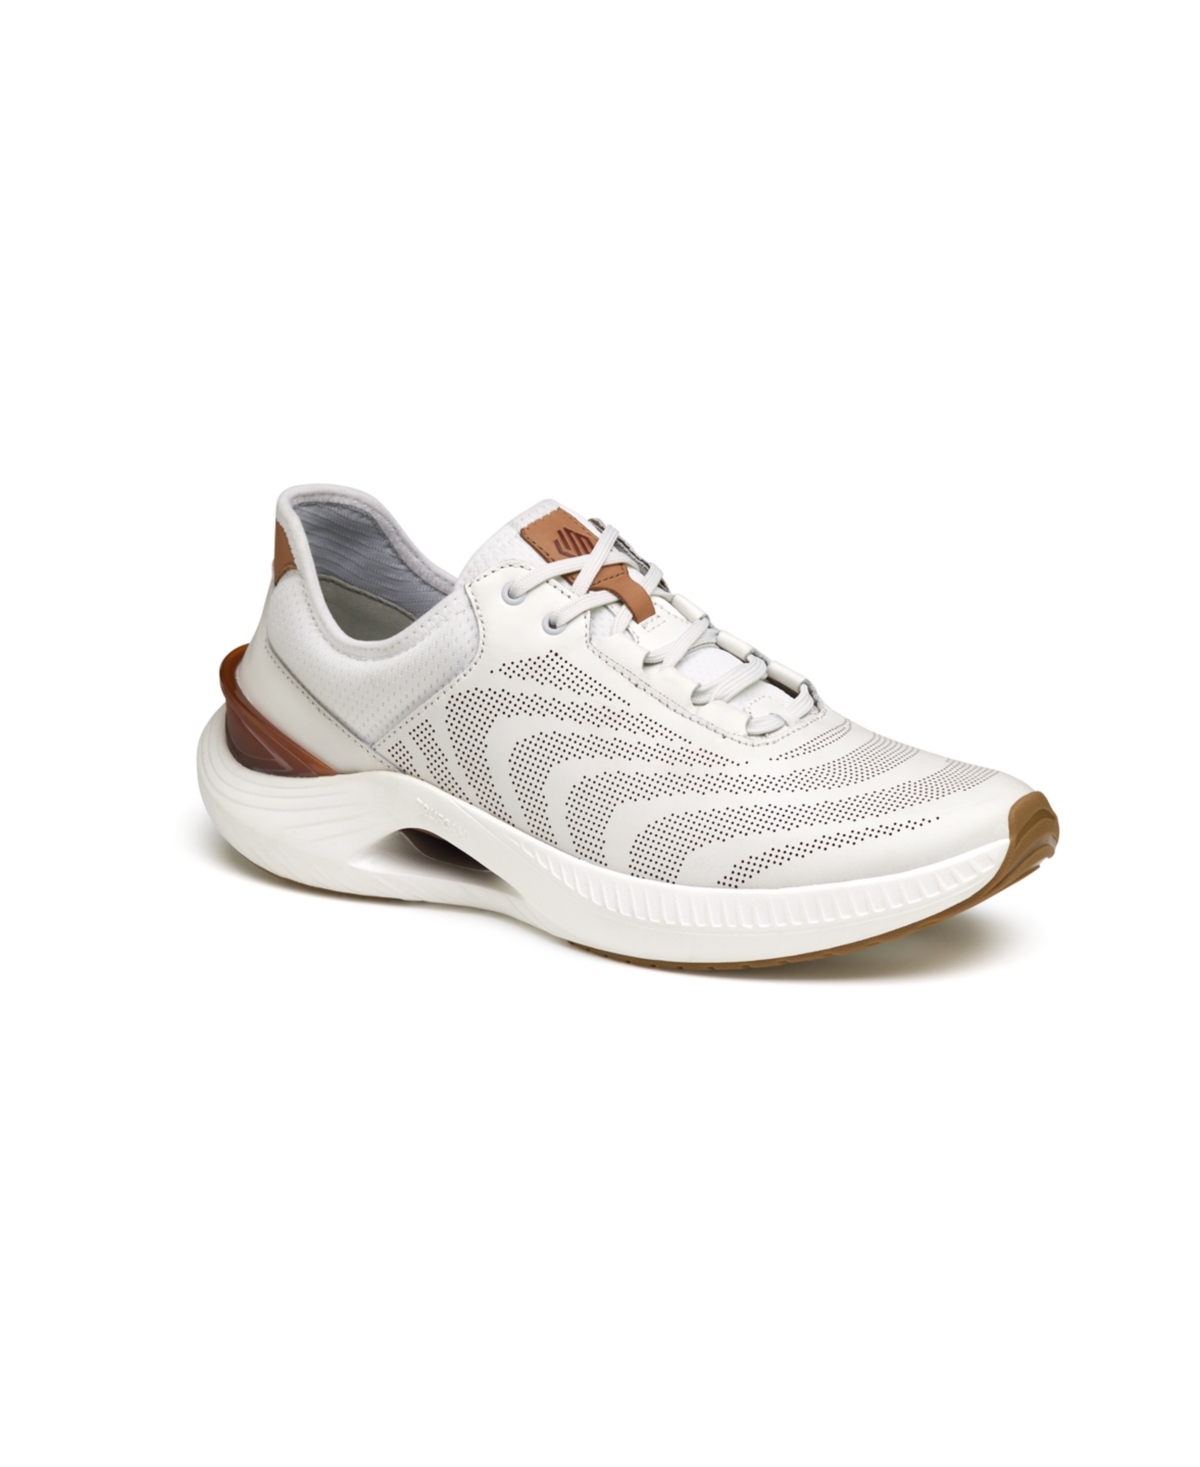 JOHNSTON & MURPHY MEN'S RT1 LUXE LACE-UP SNEAKERS